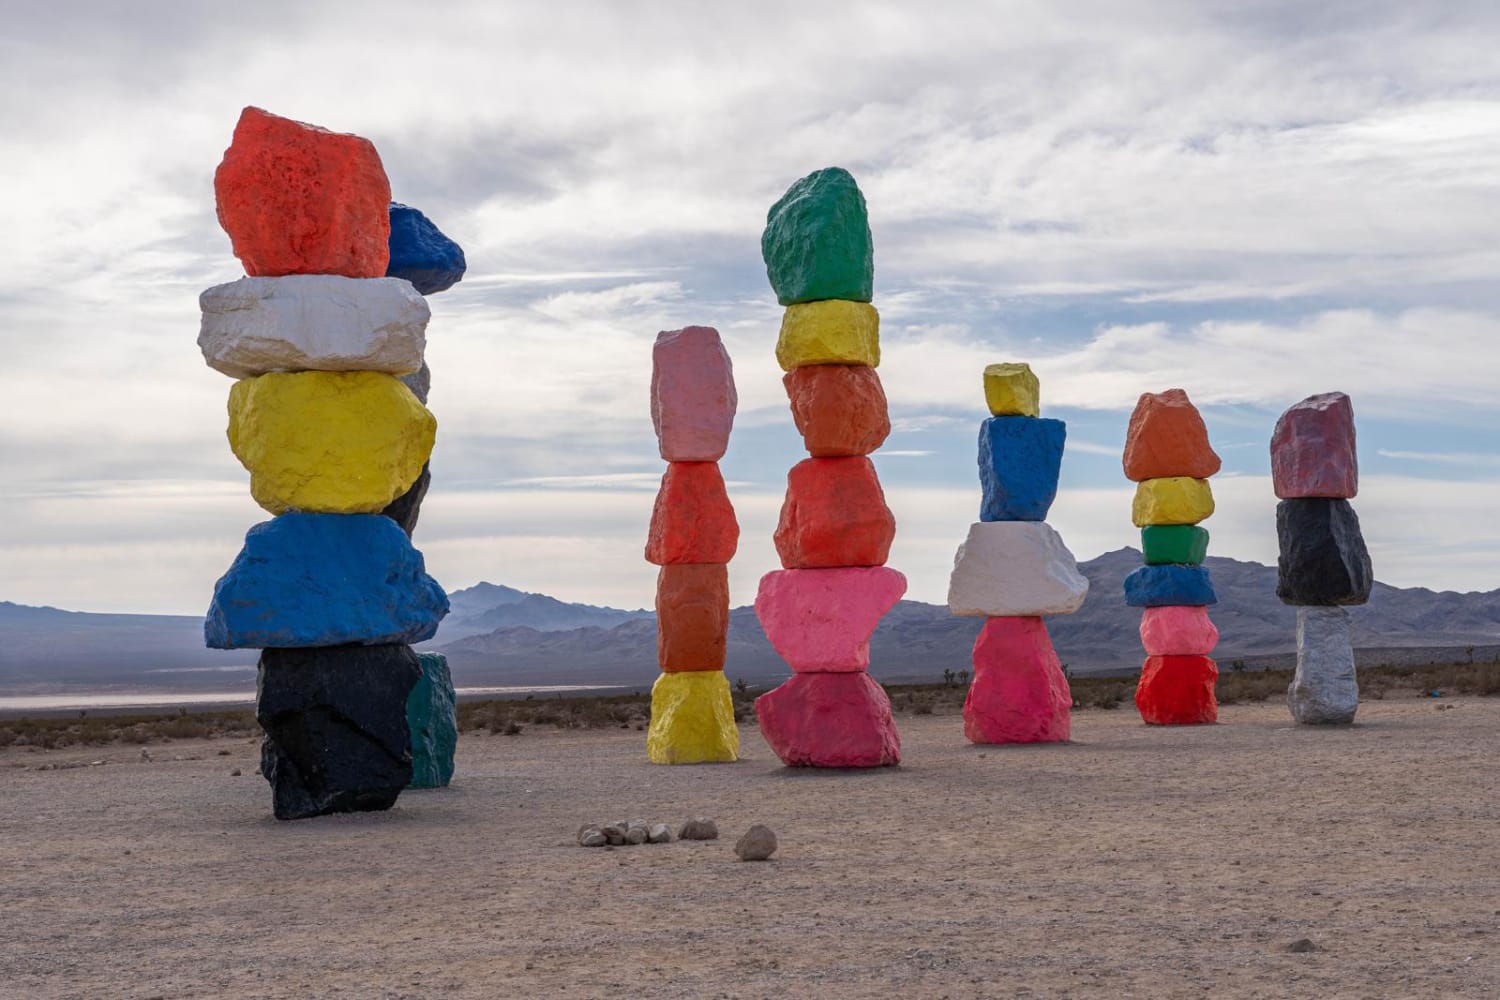 Backway to Seven Magic Mountains